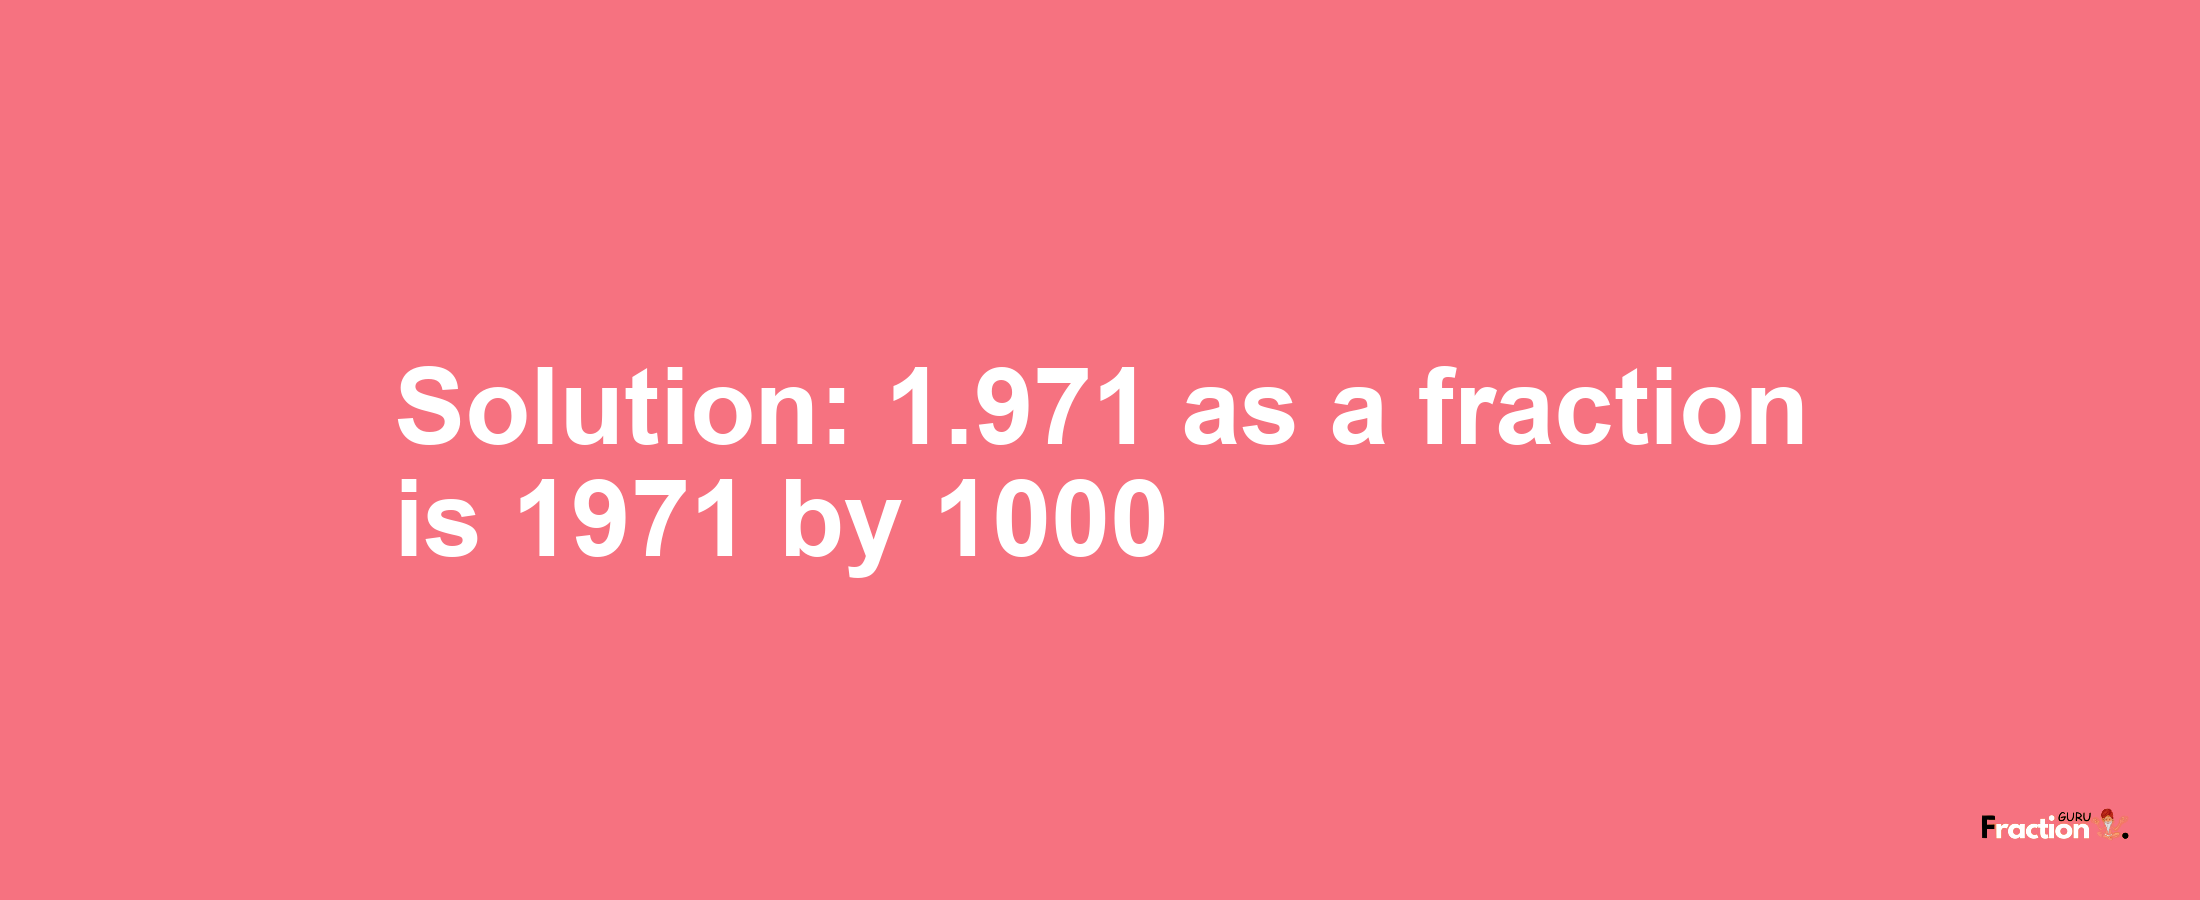 Solution:1.971 as a fraction is 1971/1000